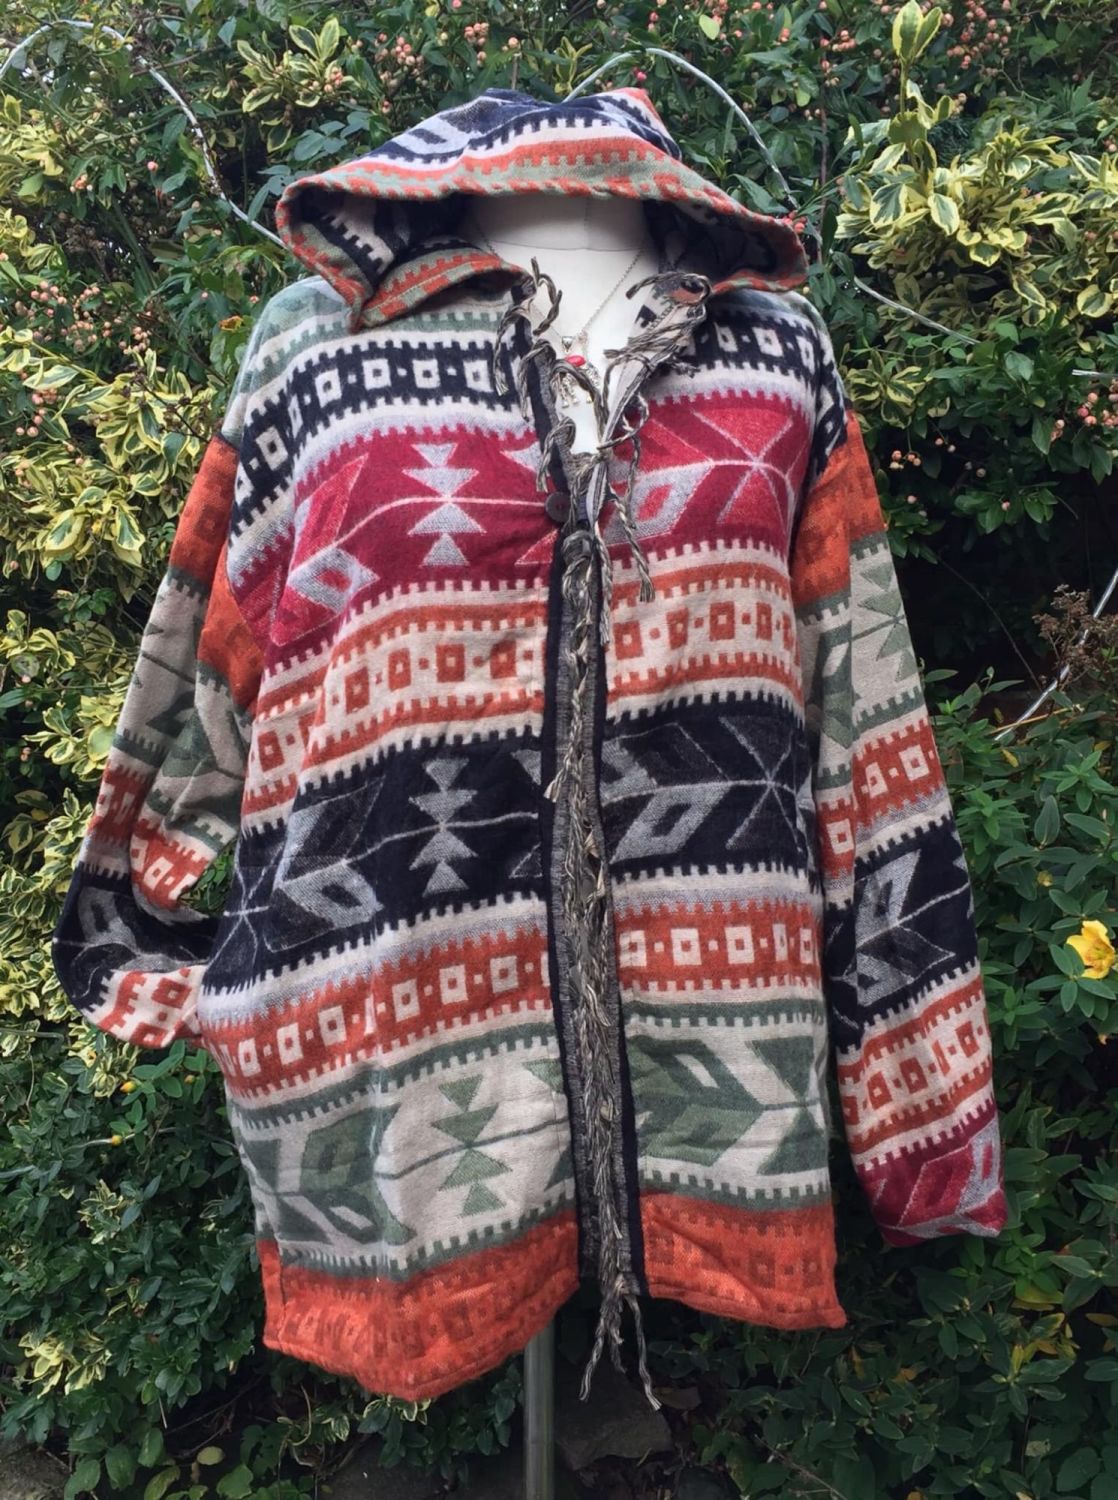 Simply gorgeous snuggie hippy fringed jacket 